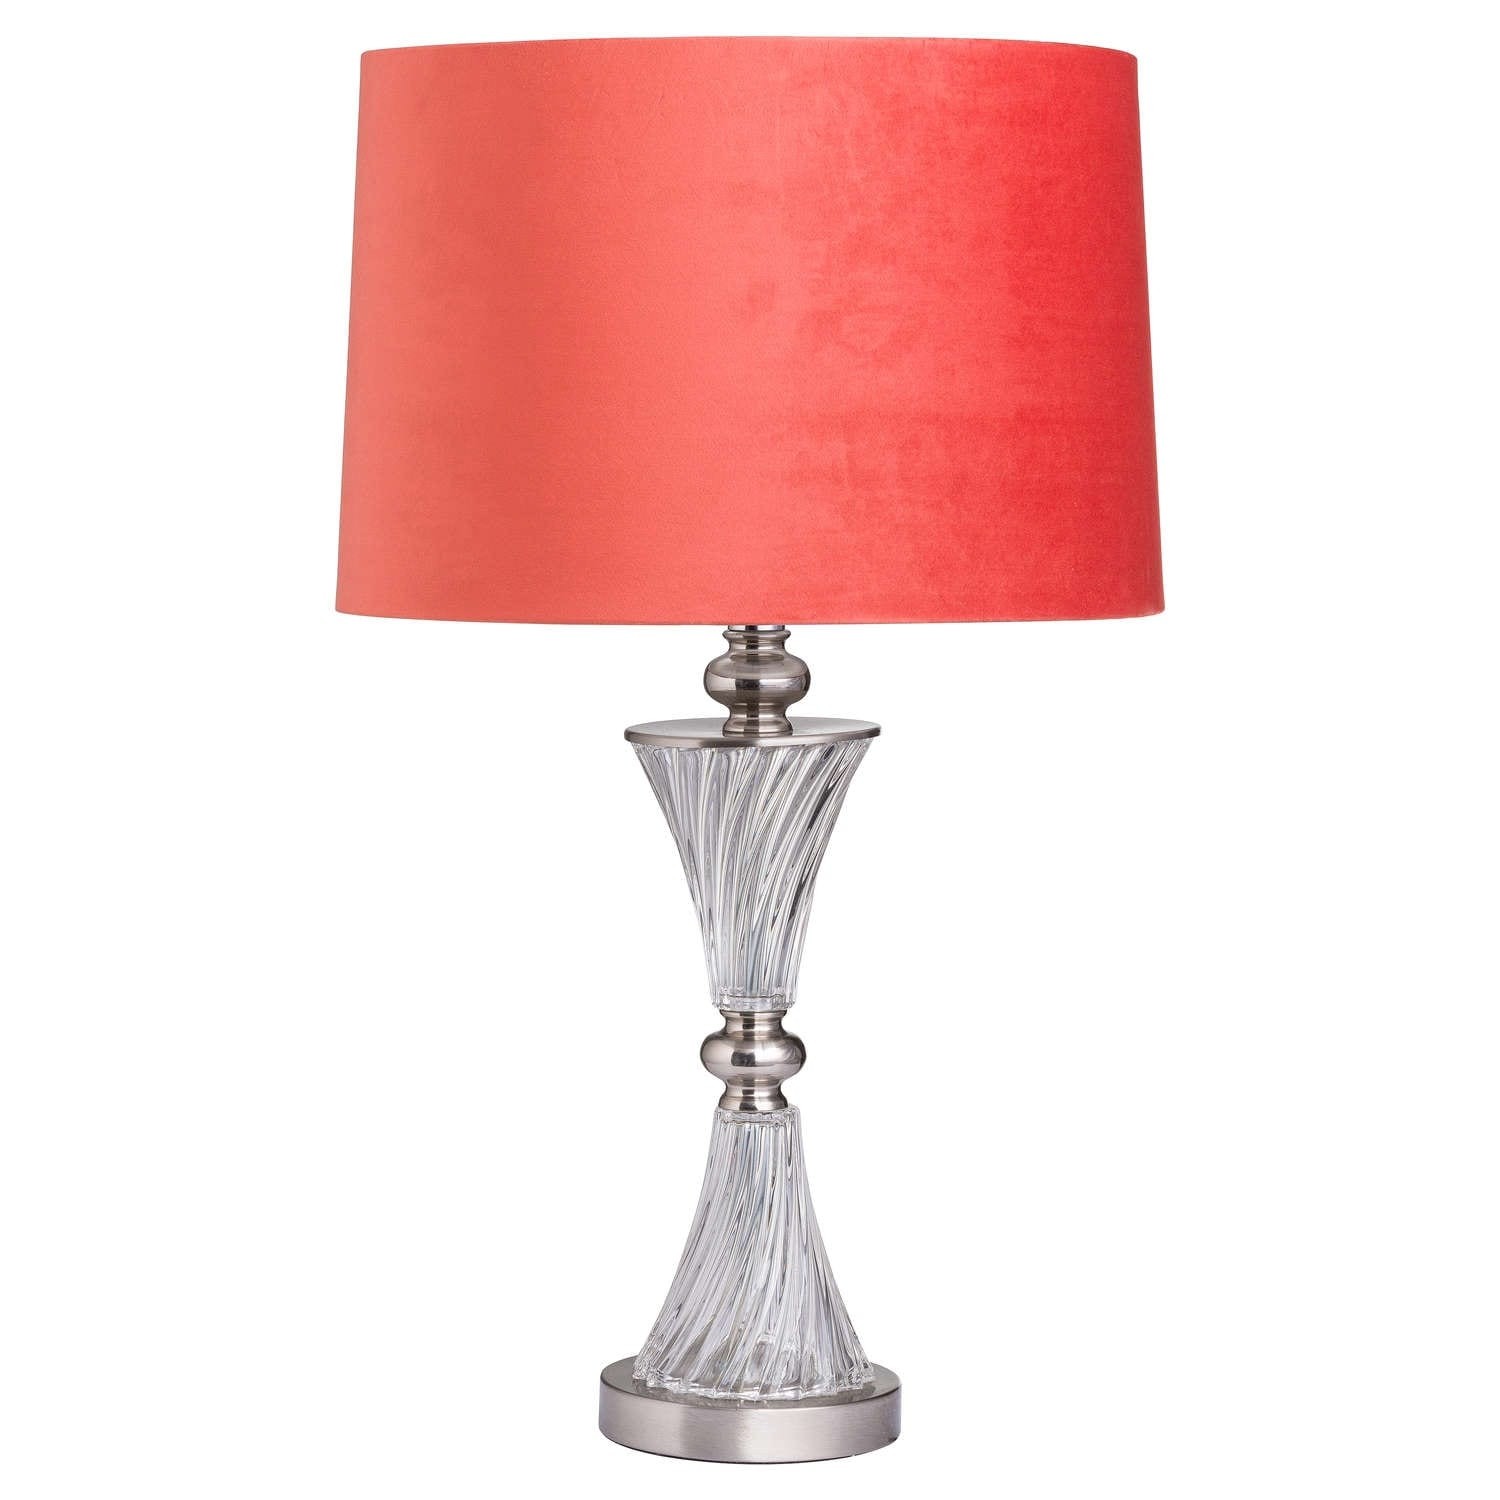 Turned glass fluted table lamp with velvet coral shade